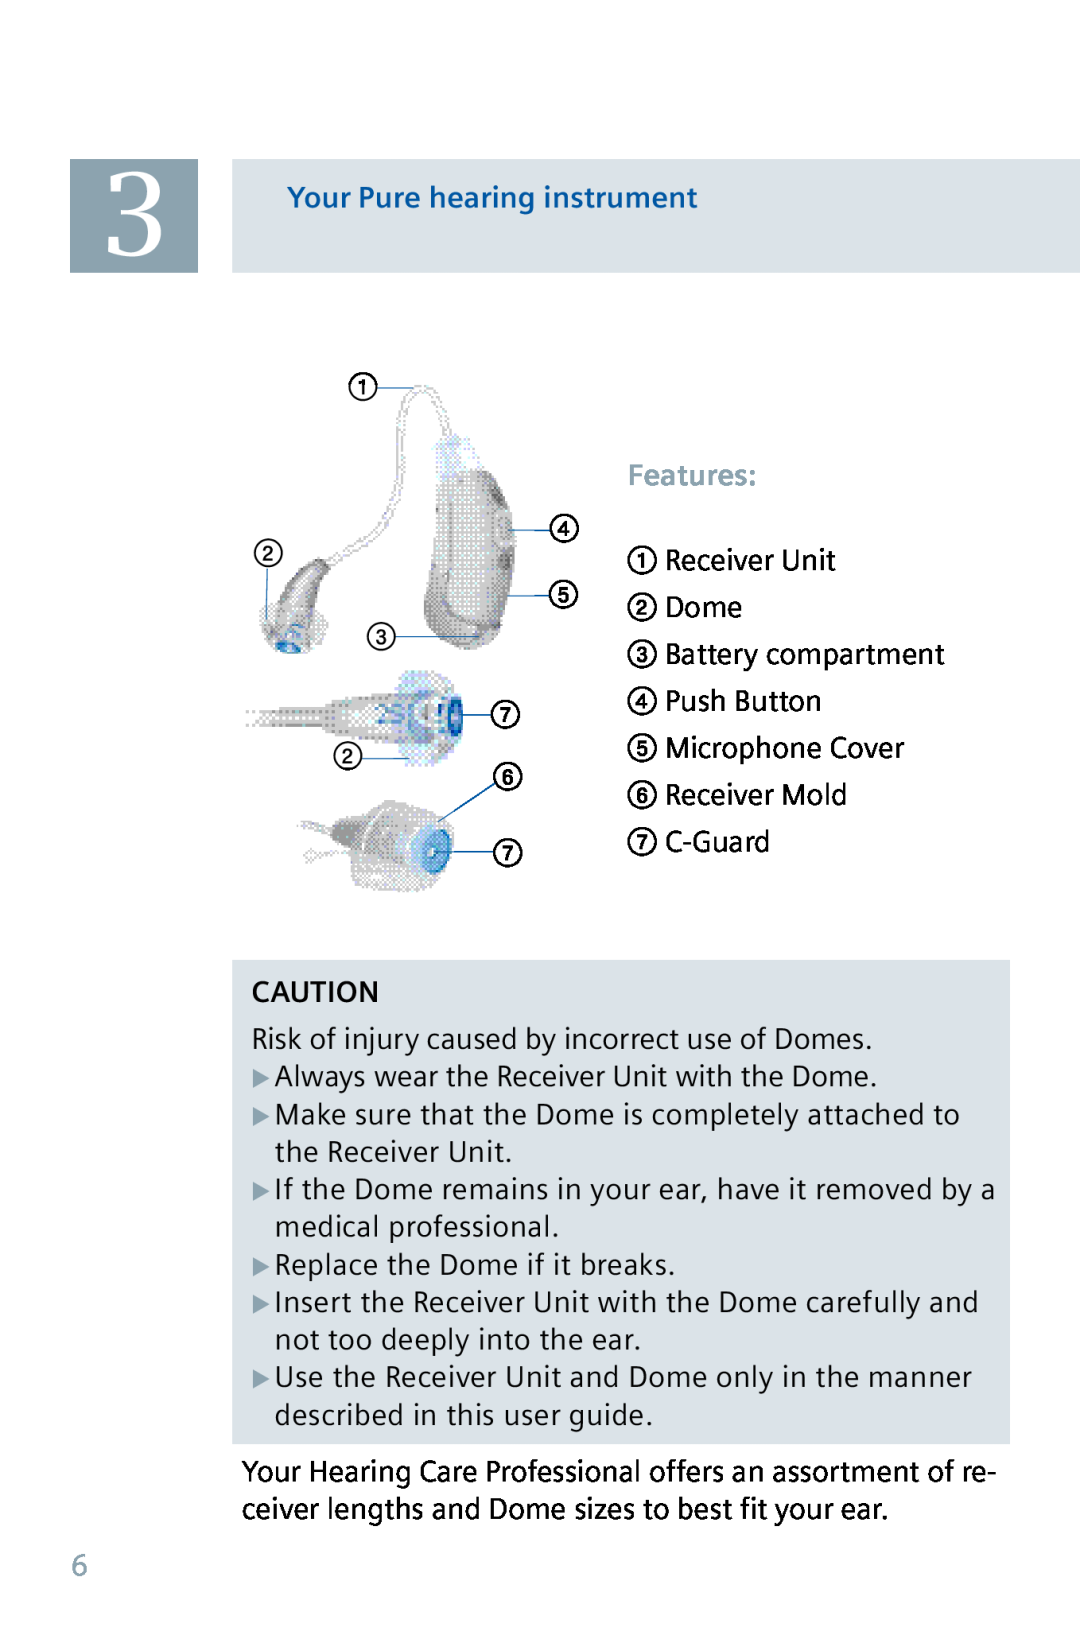 Siemens 500 3Your Pure hearing instrument, Features, ① Receiver Unit, ② Dome, ④ Push Button, ⑤ Microphone Cover, ⑦ C-Guard 